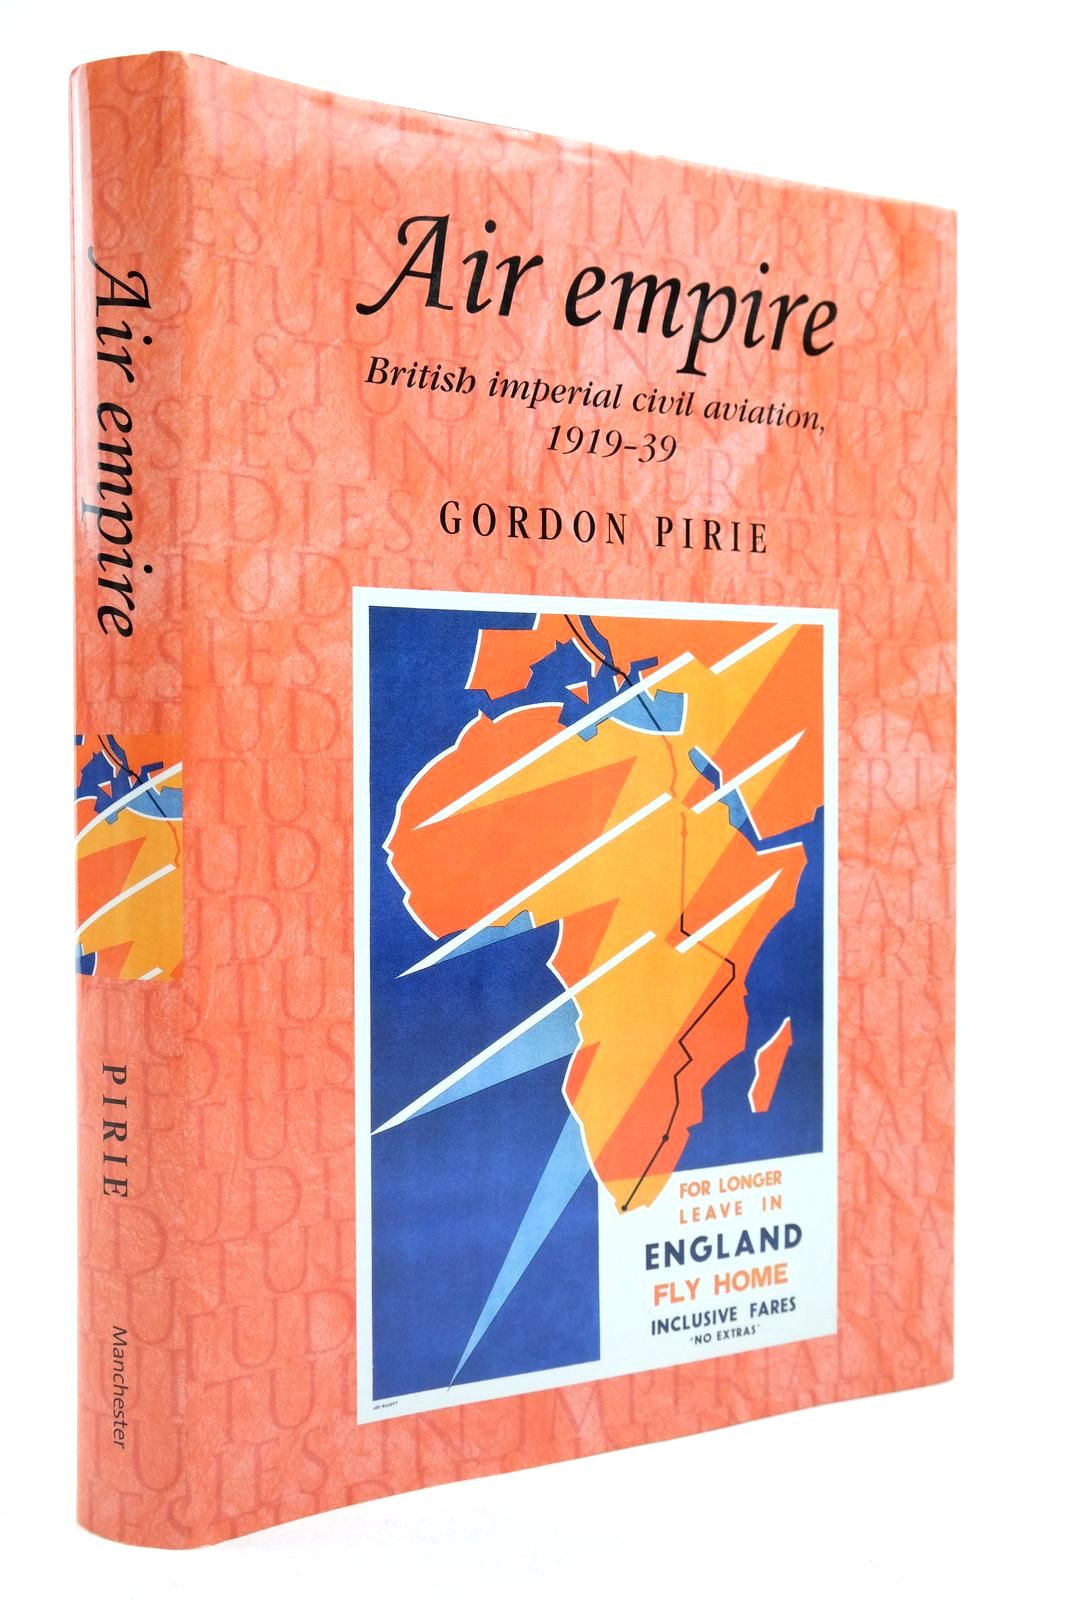 Photo of AIR EMPIRE: BRITISH IMPERIAL CIVIL AVIATION, 1919-39 written by Pirie, Gordon published by Manchester University Press (STOCK CODE: 2139412)  for sale by Stella & Rose's Books